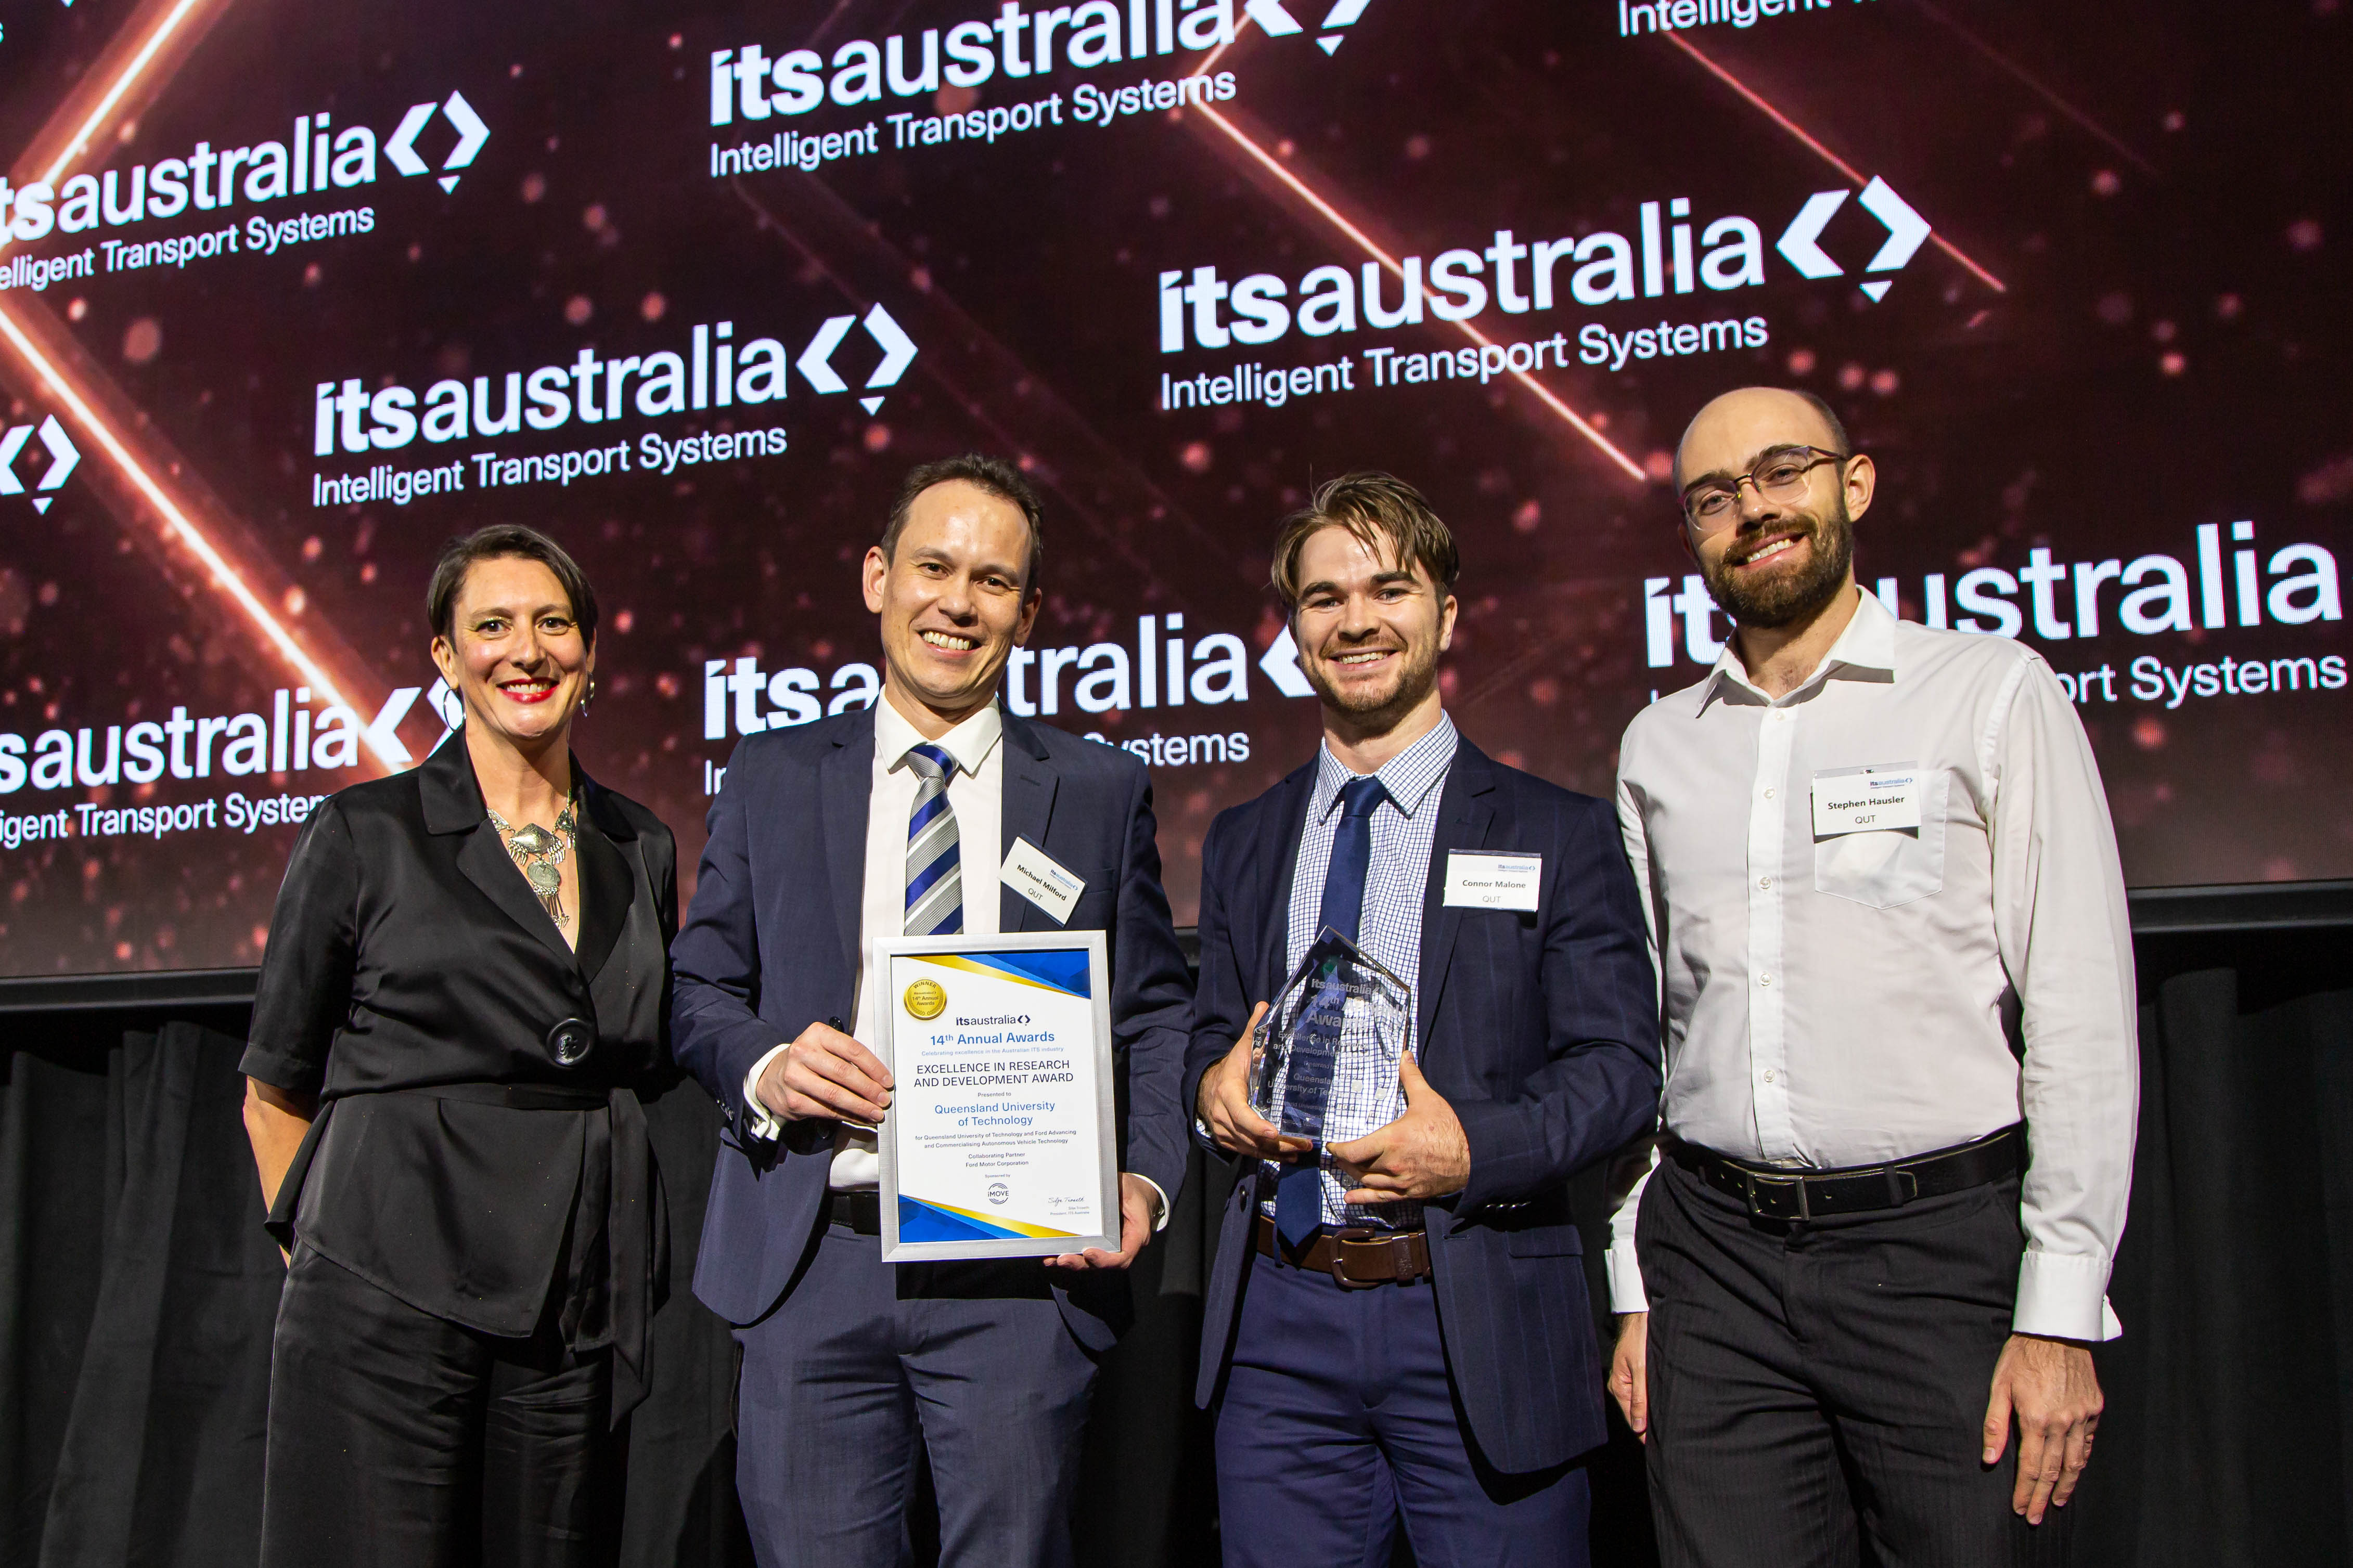 Queensland R&D innovation excellence awards (image: ITS Australia)